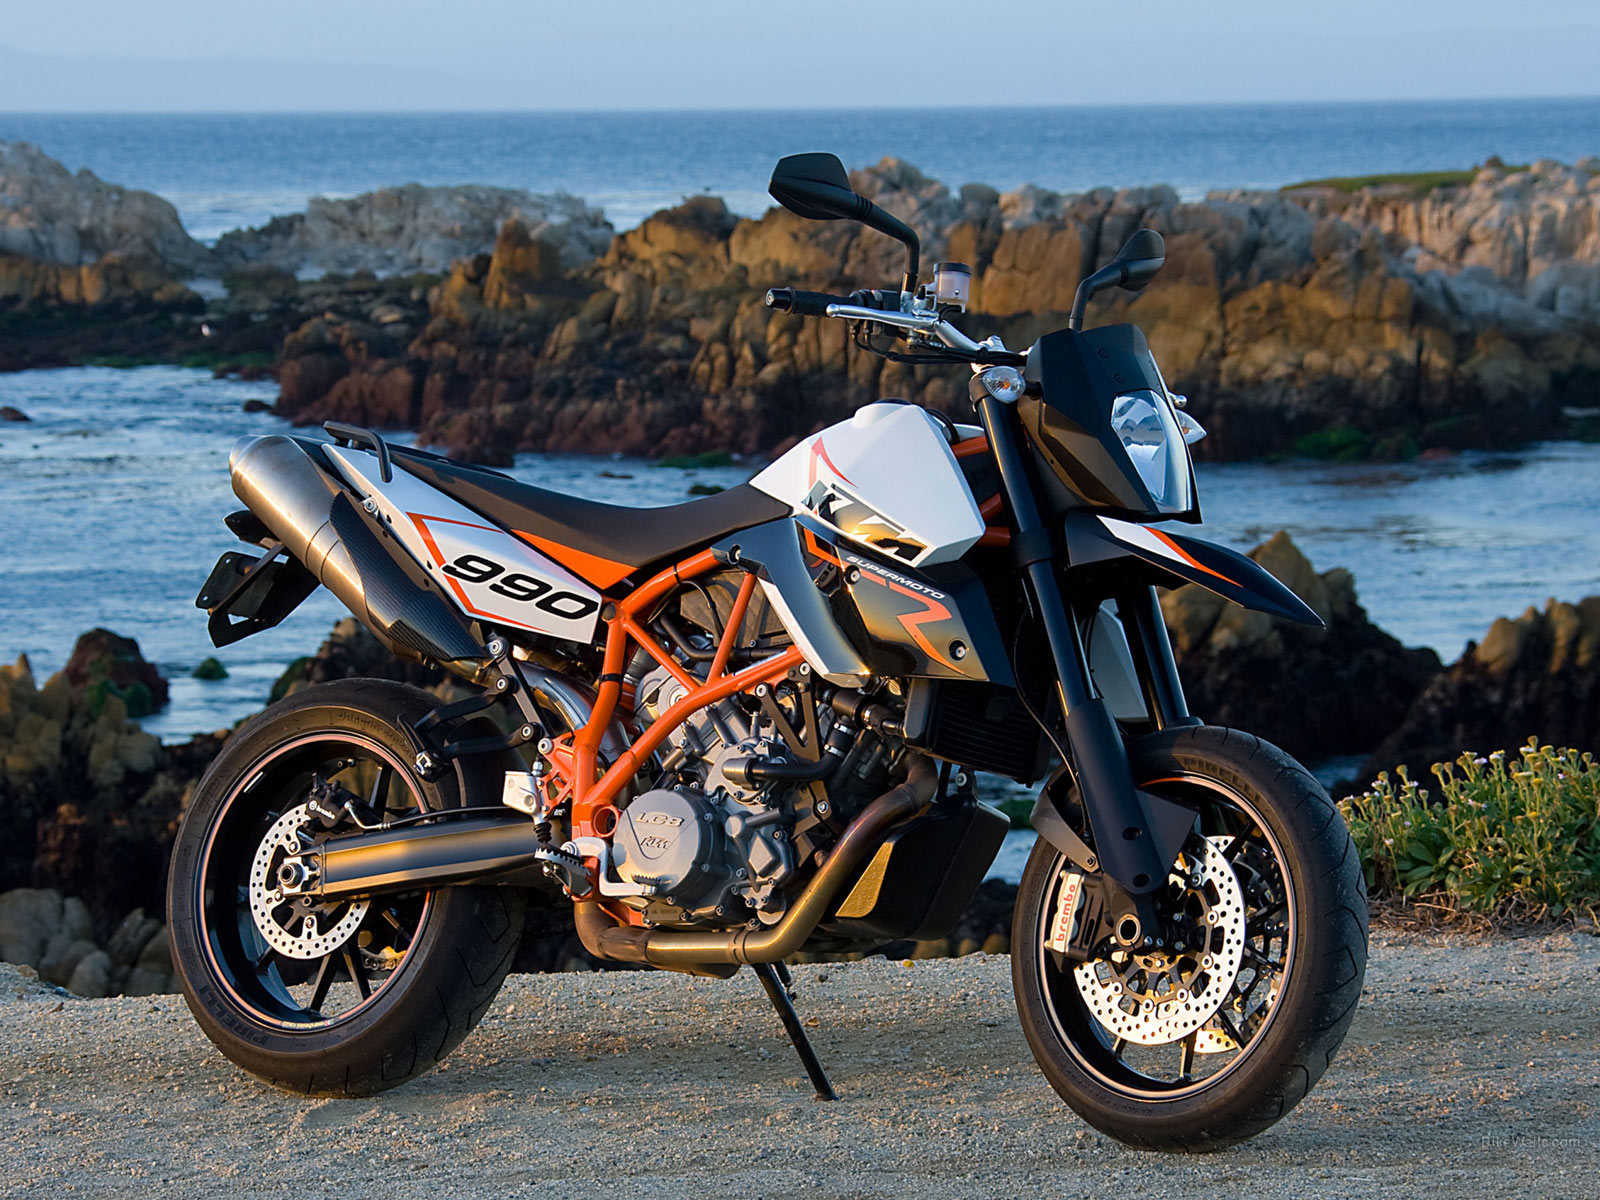 Awesome KTM motorcycle hd wallpaper ~ The Wallpaper Database